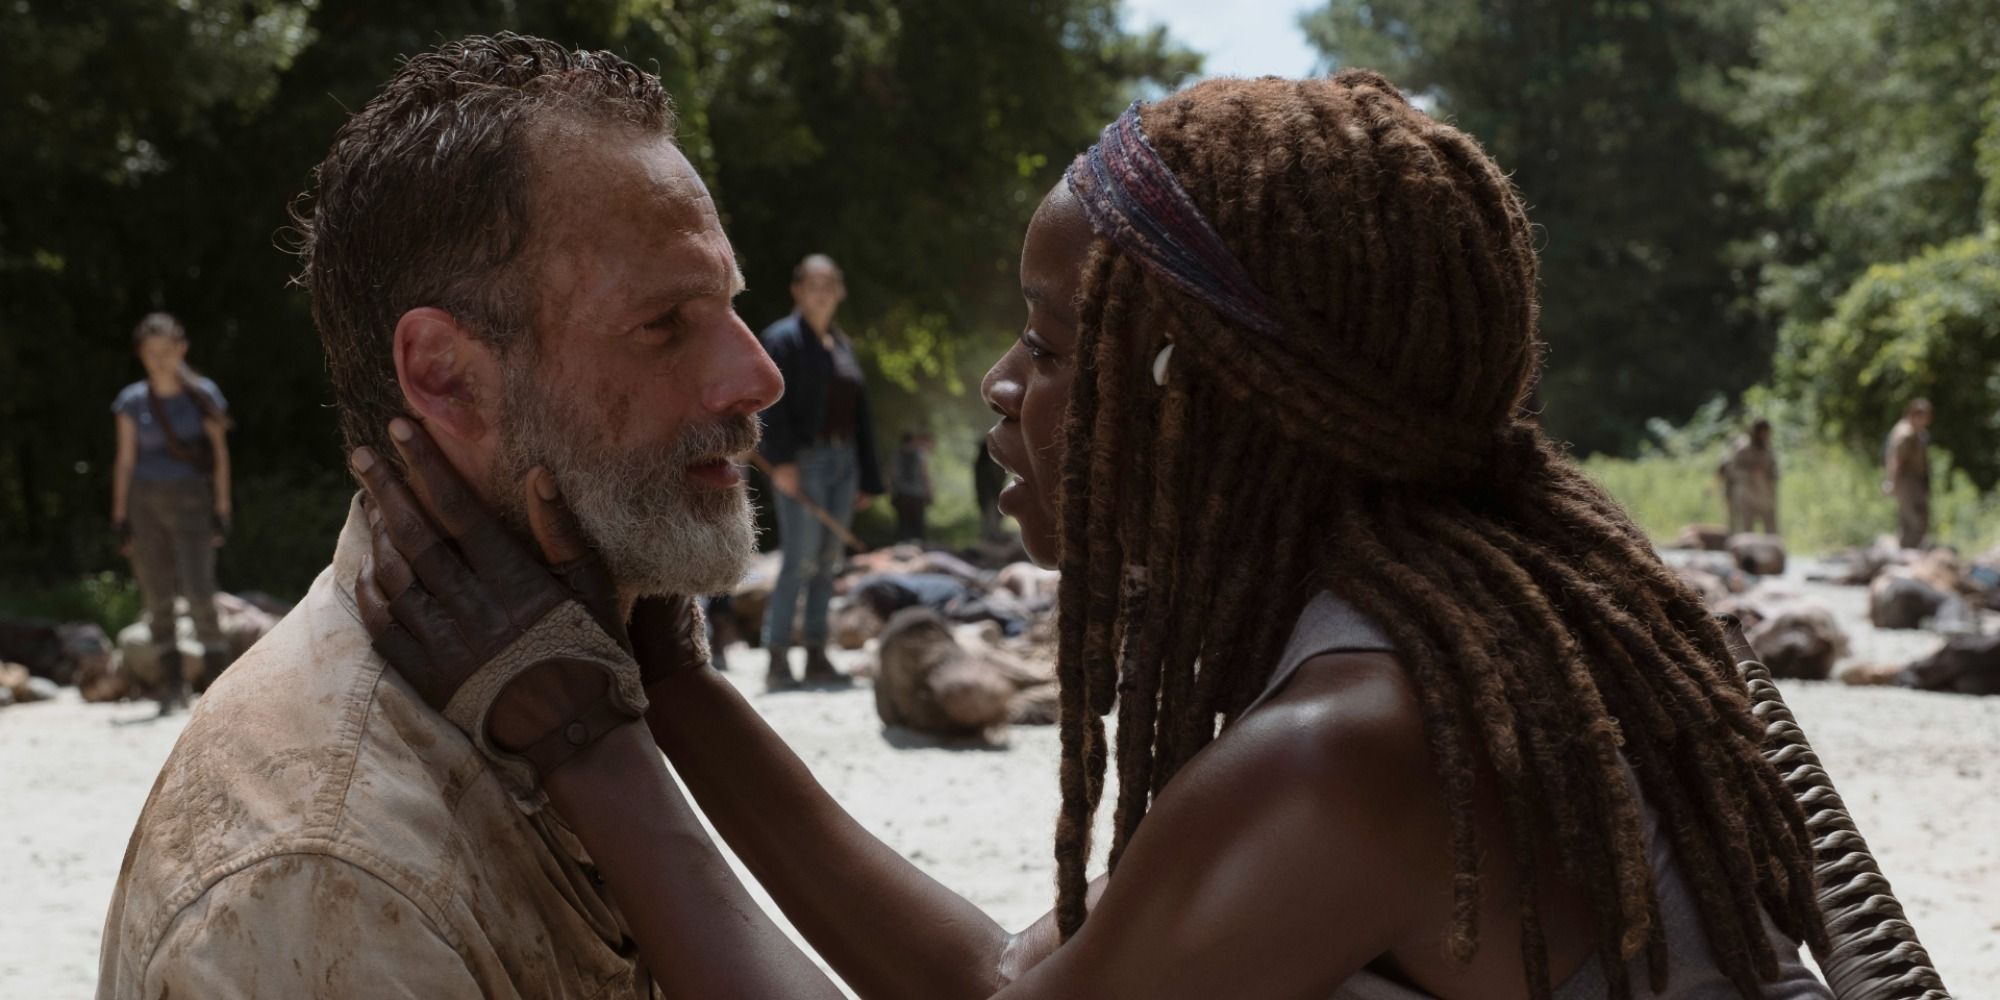 Michonne (Danai Gurira) kneeling with her hand on Rick's (Andrew Lincoln) face in The Walking Dead